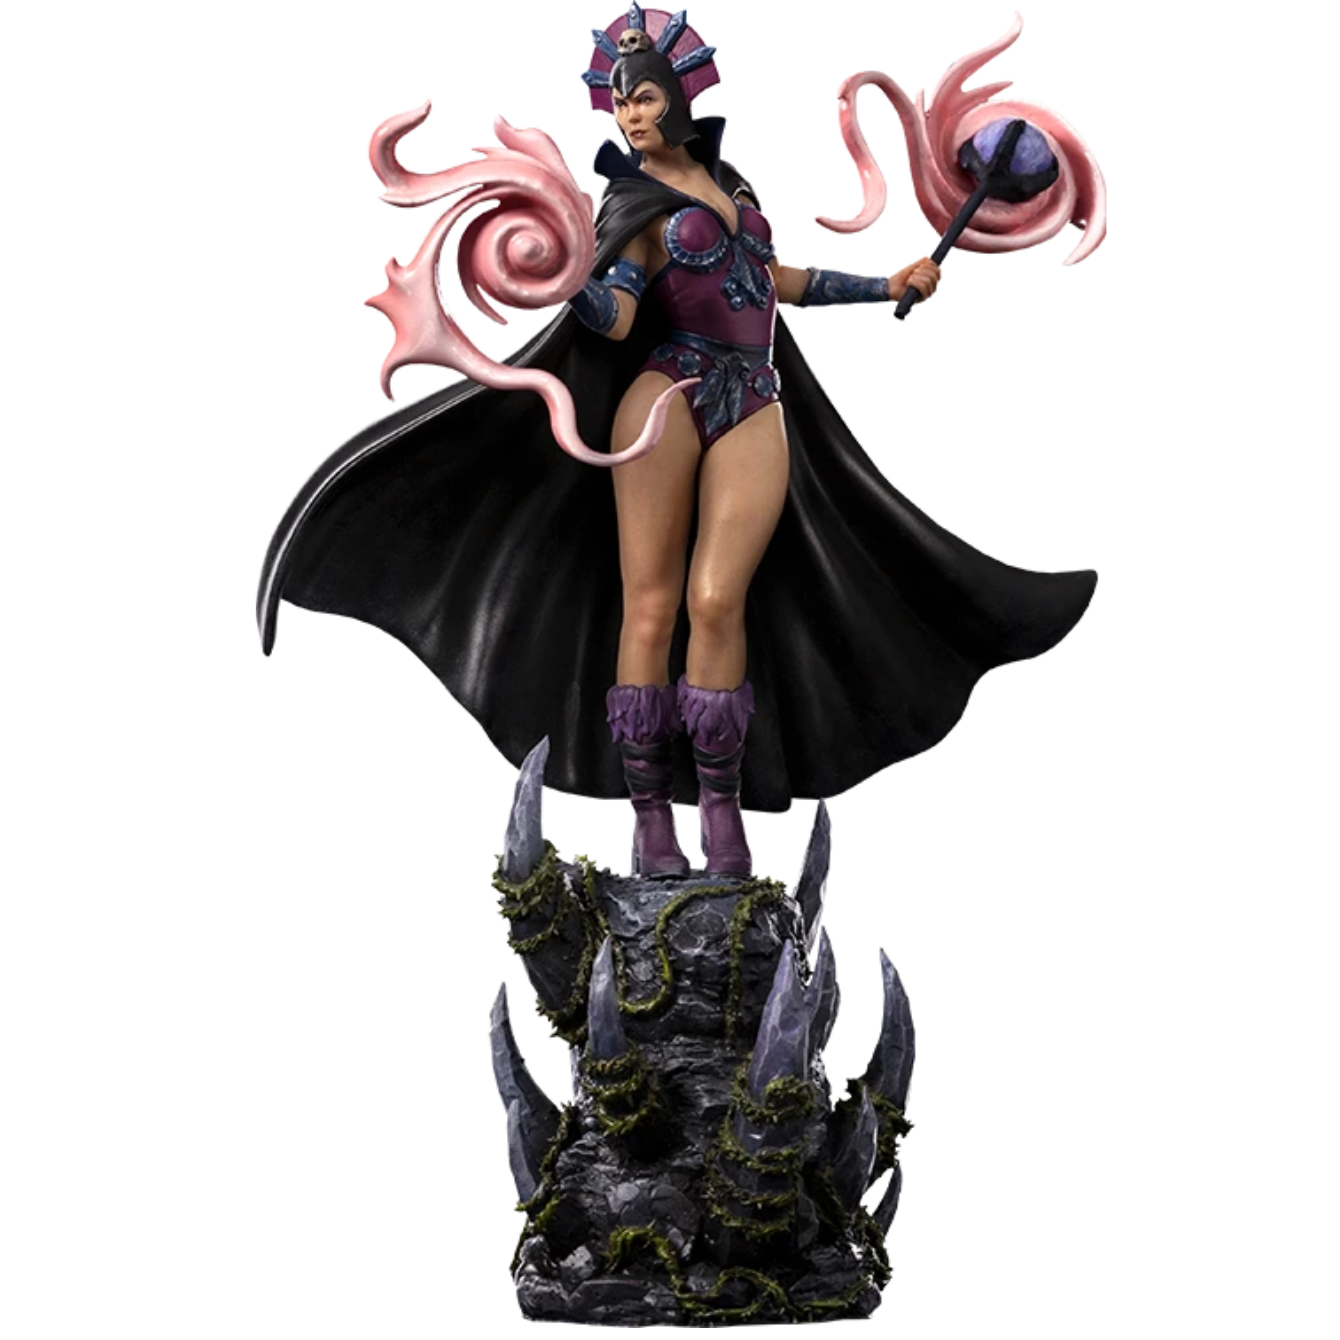 EVIL-LYN 1:10 Scale Statue by Iron Studios